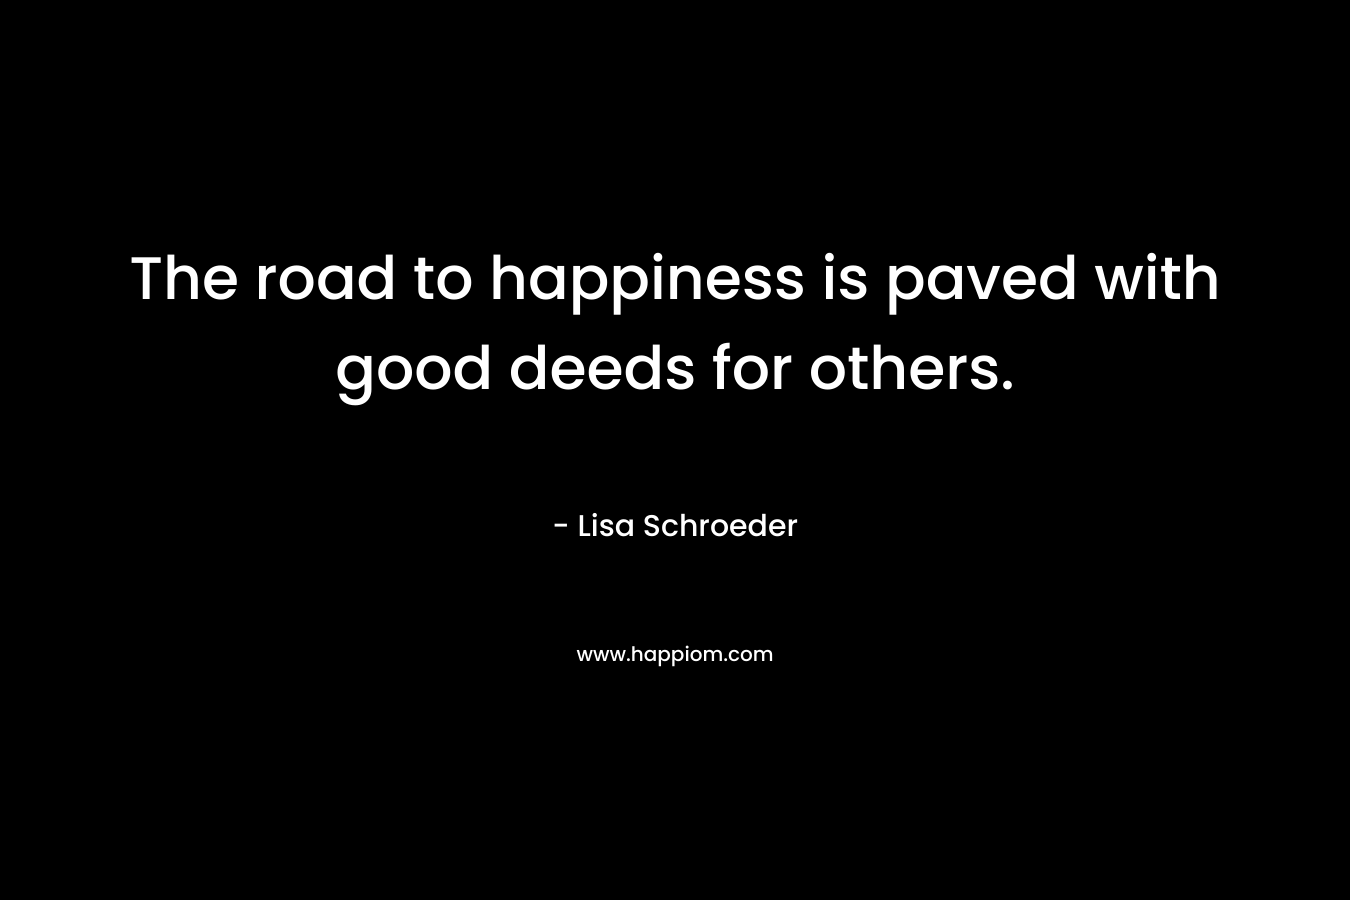 The road to happiness is paved with good deeds for others.